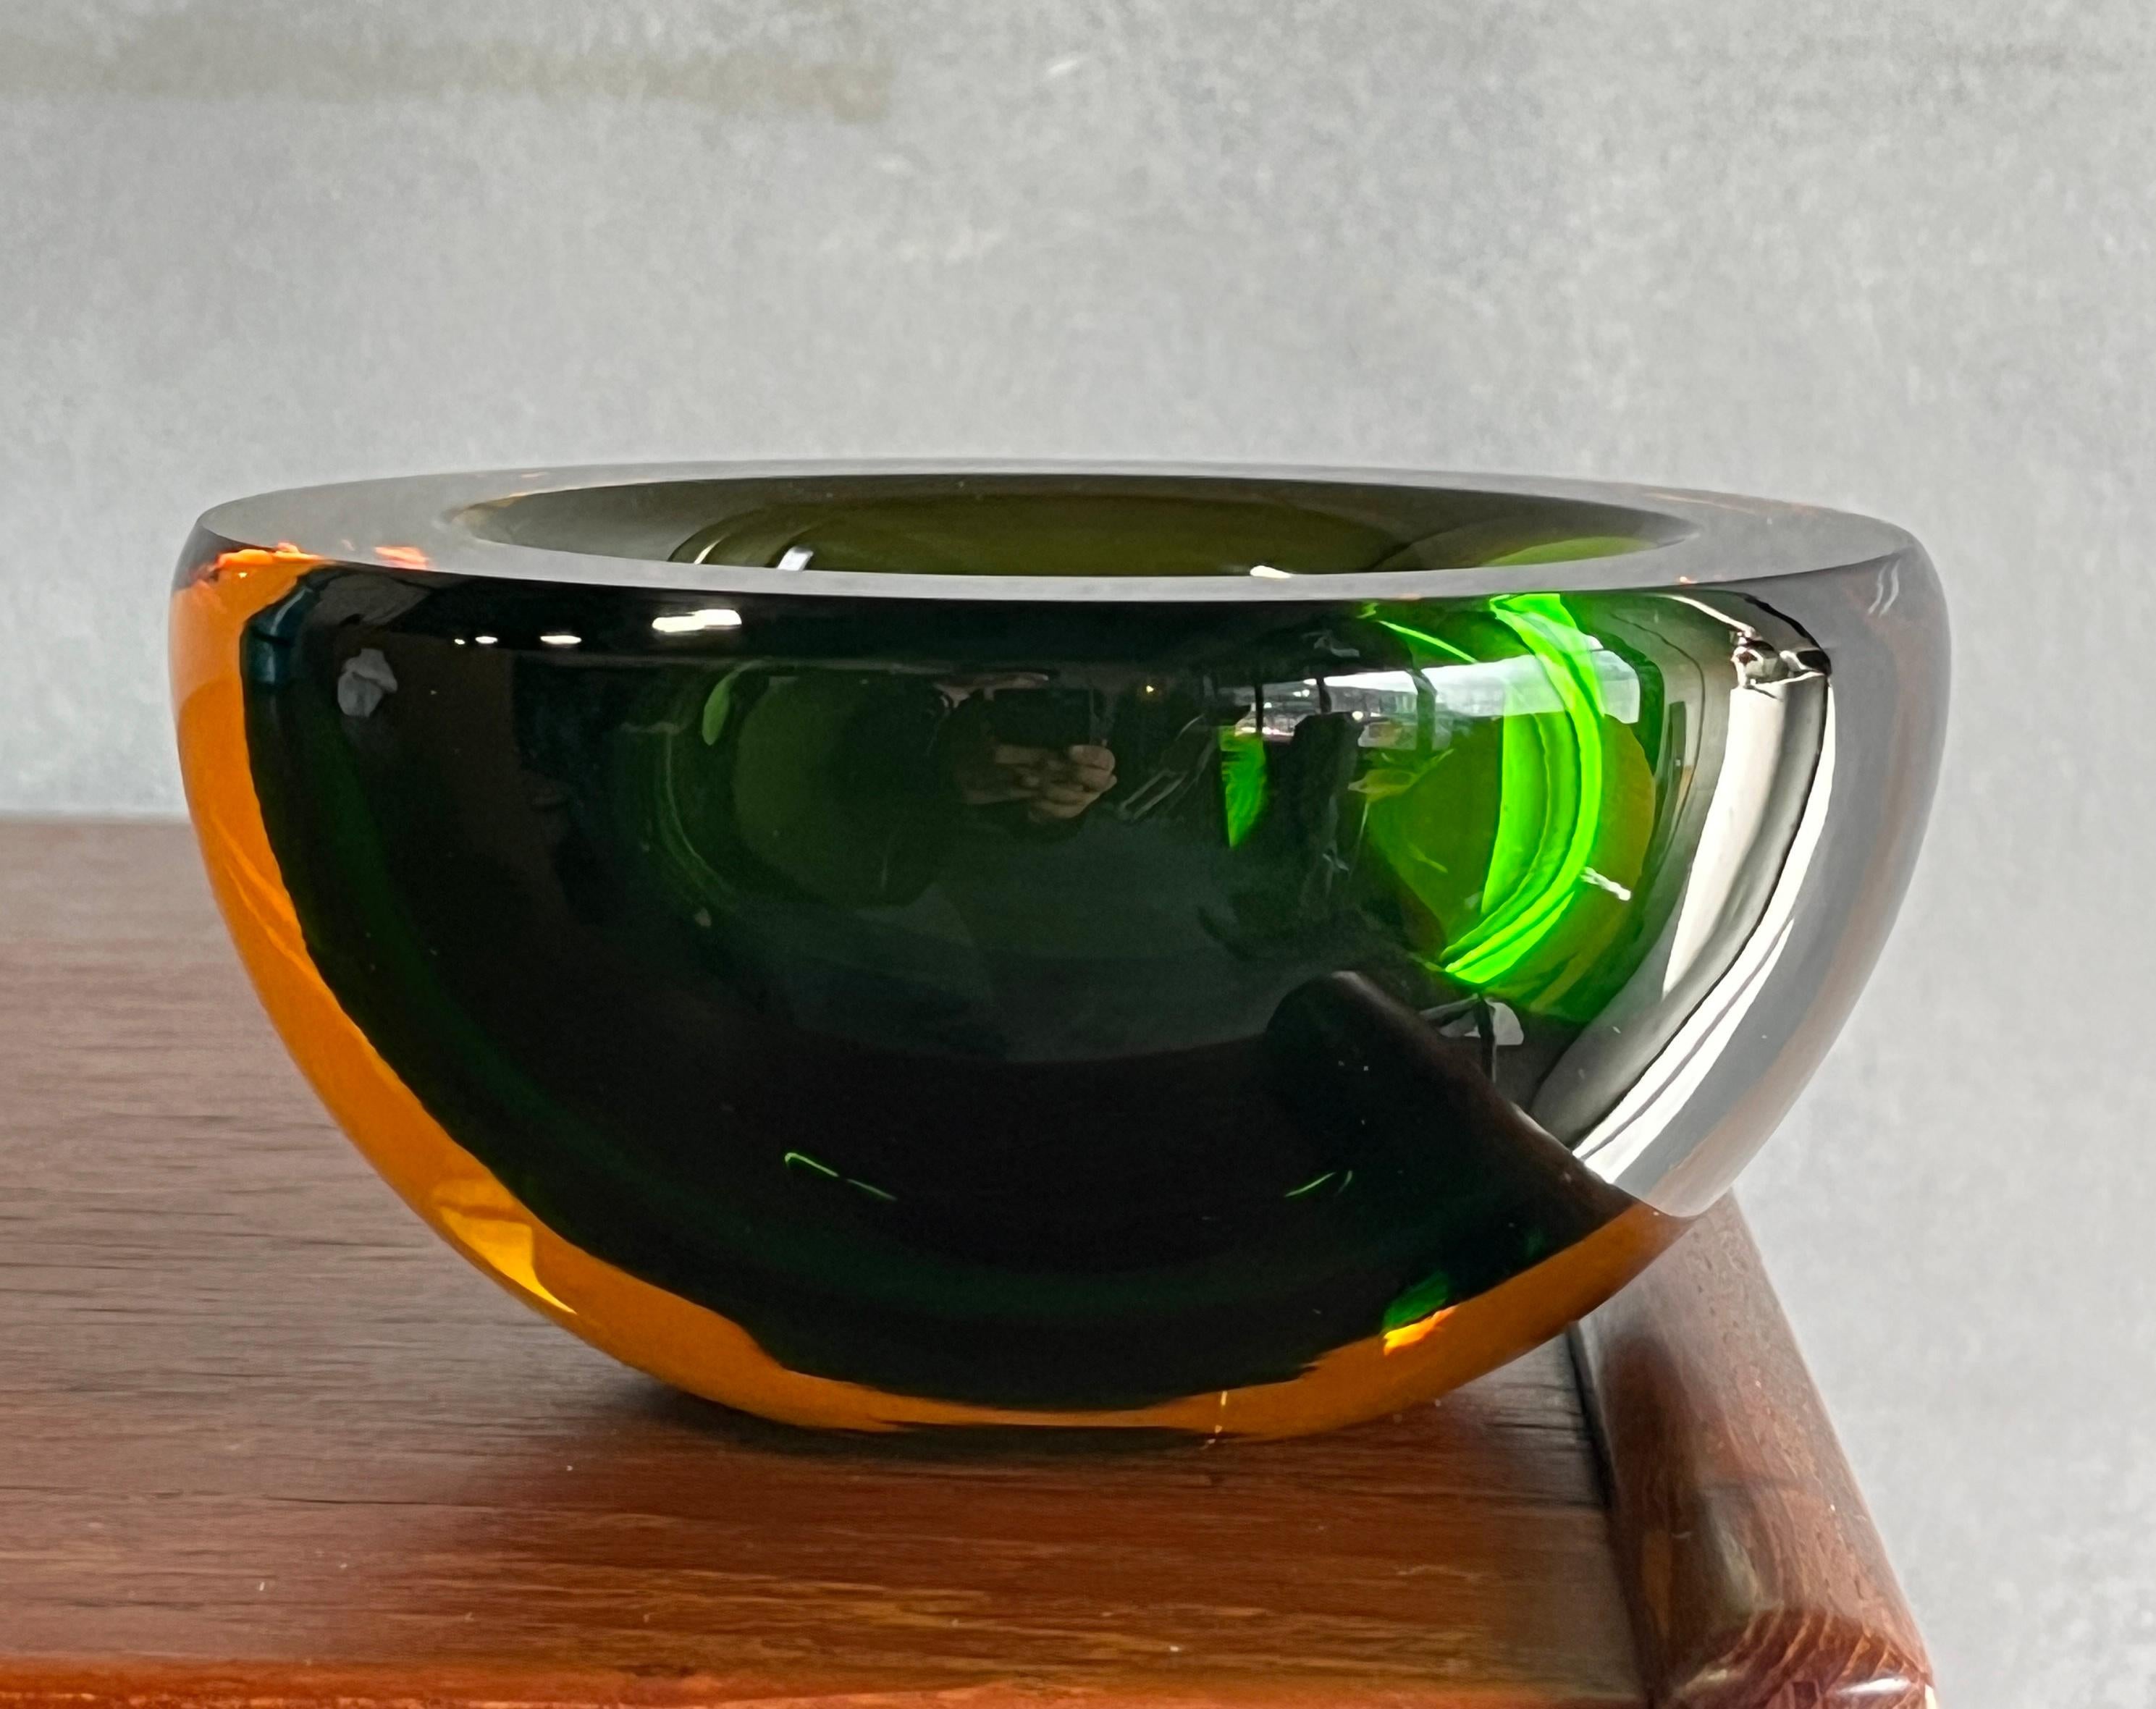 Gorgeous Murano Sommerso glass bowl, in absolutely excellent condition: no scratches, no loss: impeccable. The brilliant colors of green and amber of this faceted flat cut polished glass Murano geode bowl is exquisite. When light hits the bowl, it